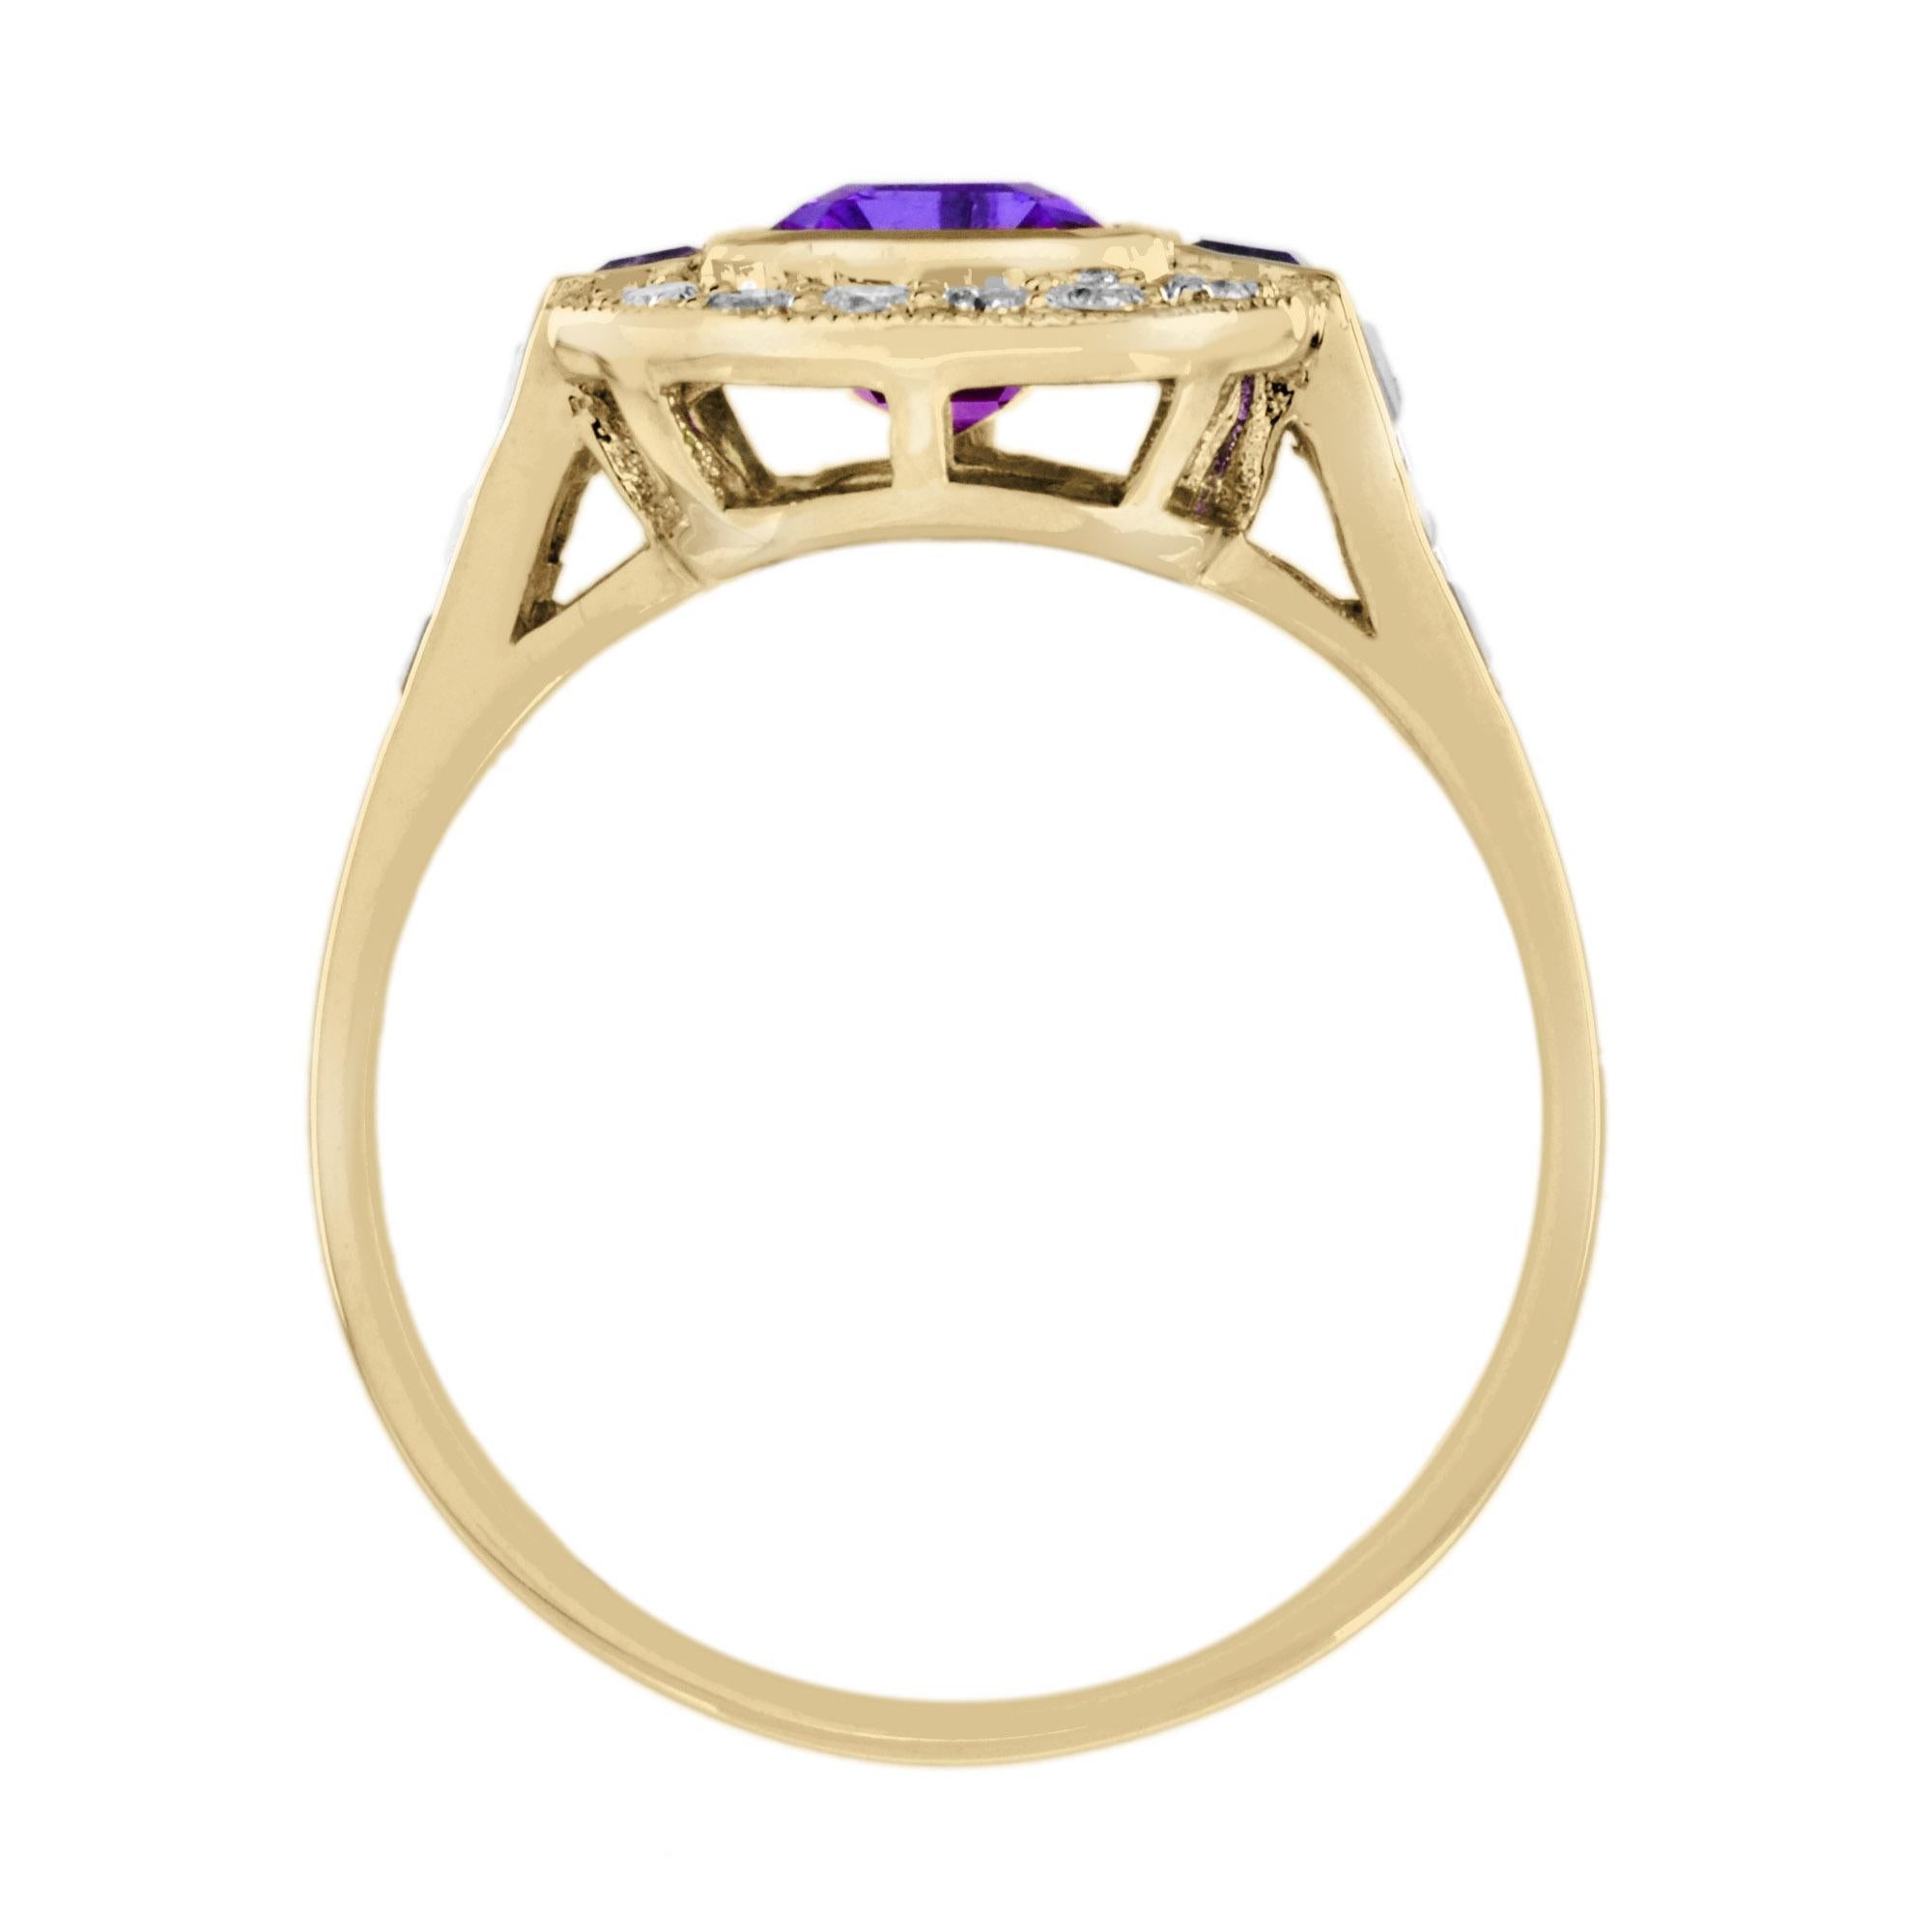 Emerald Cut Amethyst and Diamond Art Deco Style Halo Ring in 9K Yellow Gold 2